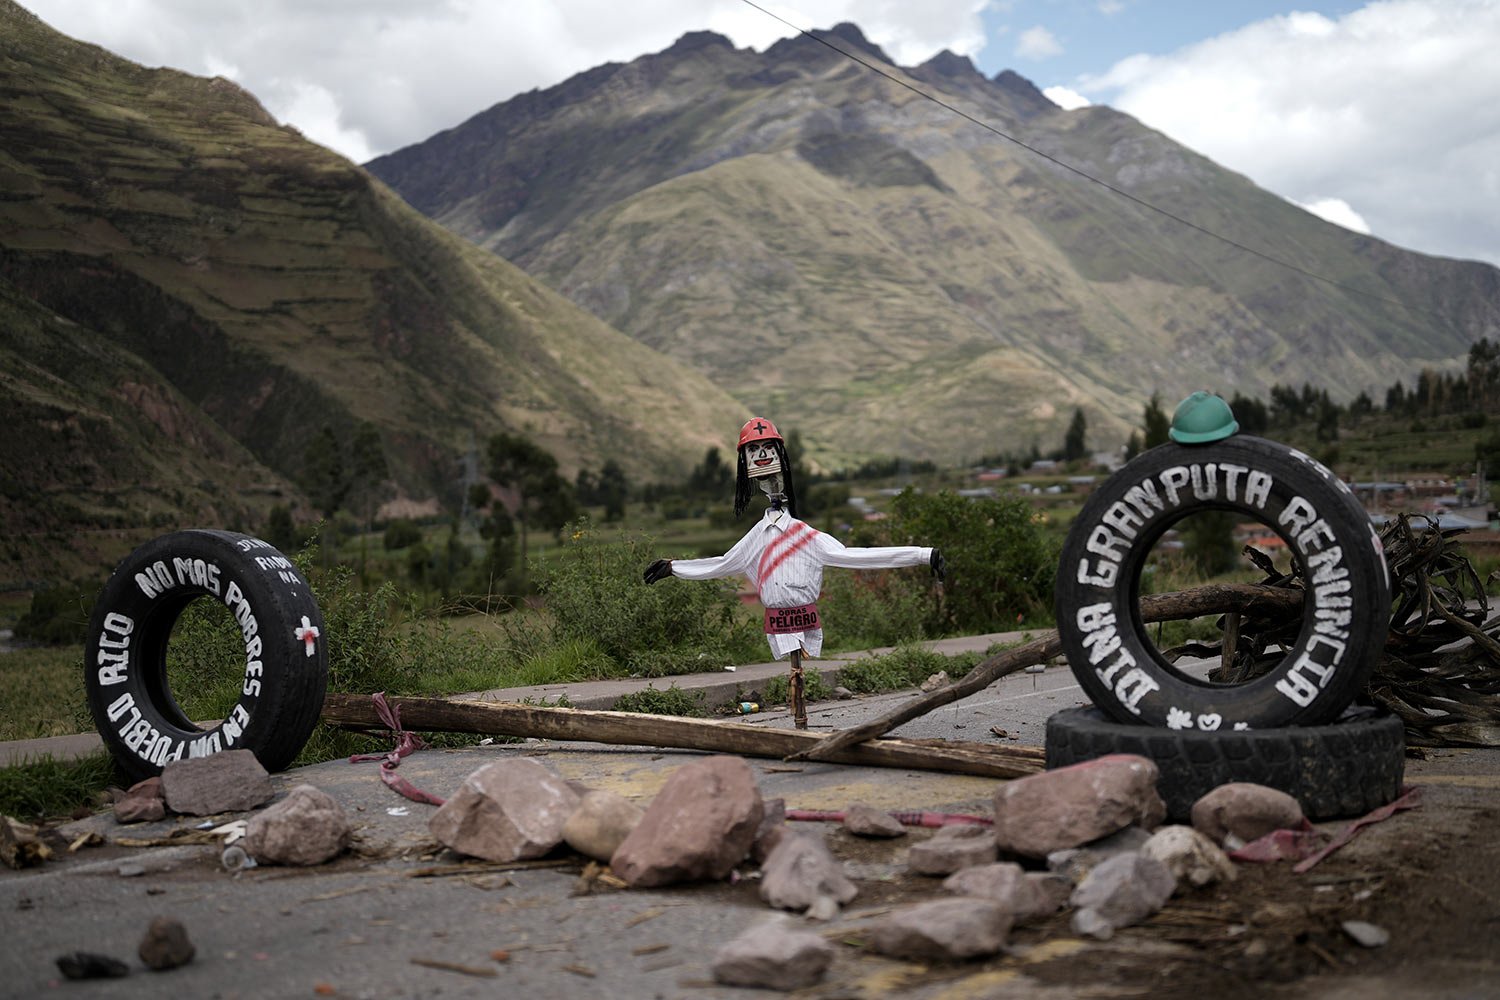  An effigy of President Dina Boluarte makes up part of a roadblock set up by demonstrators asking for the president’s resignation in Cusipata, Peru, Jan. 28, 2023. Government officials said police and military will clear roadblocks set up nationwide 